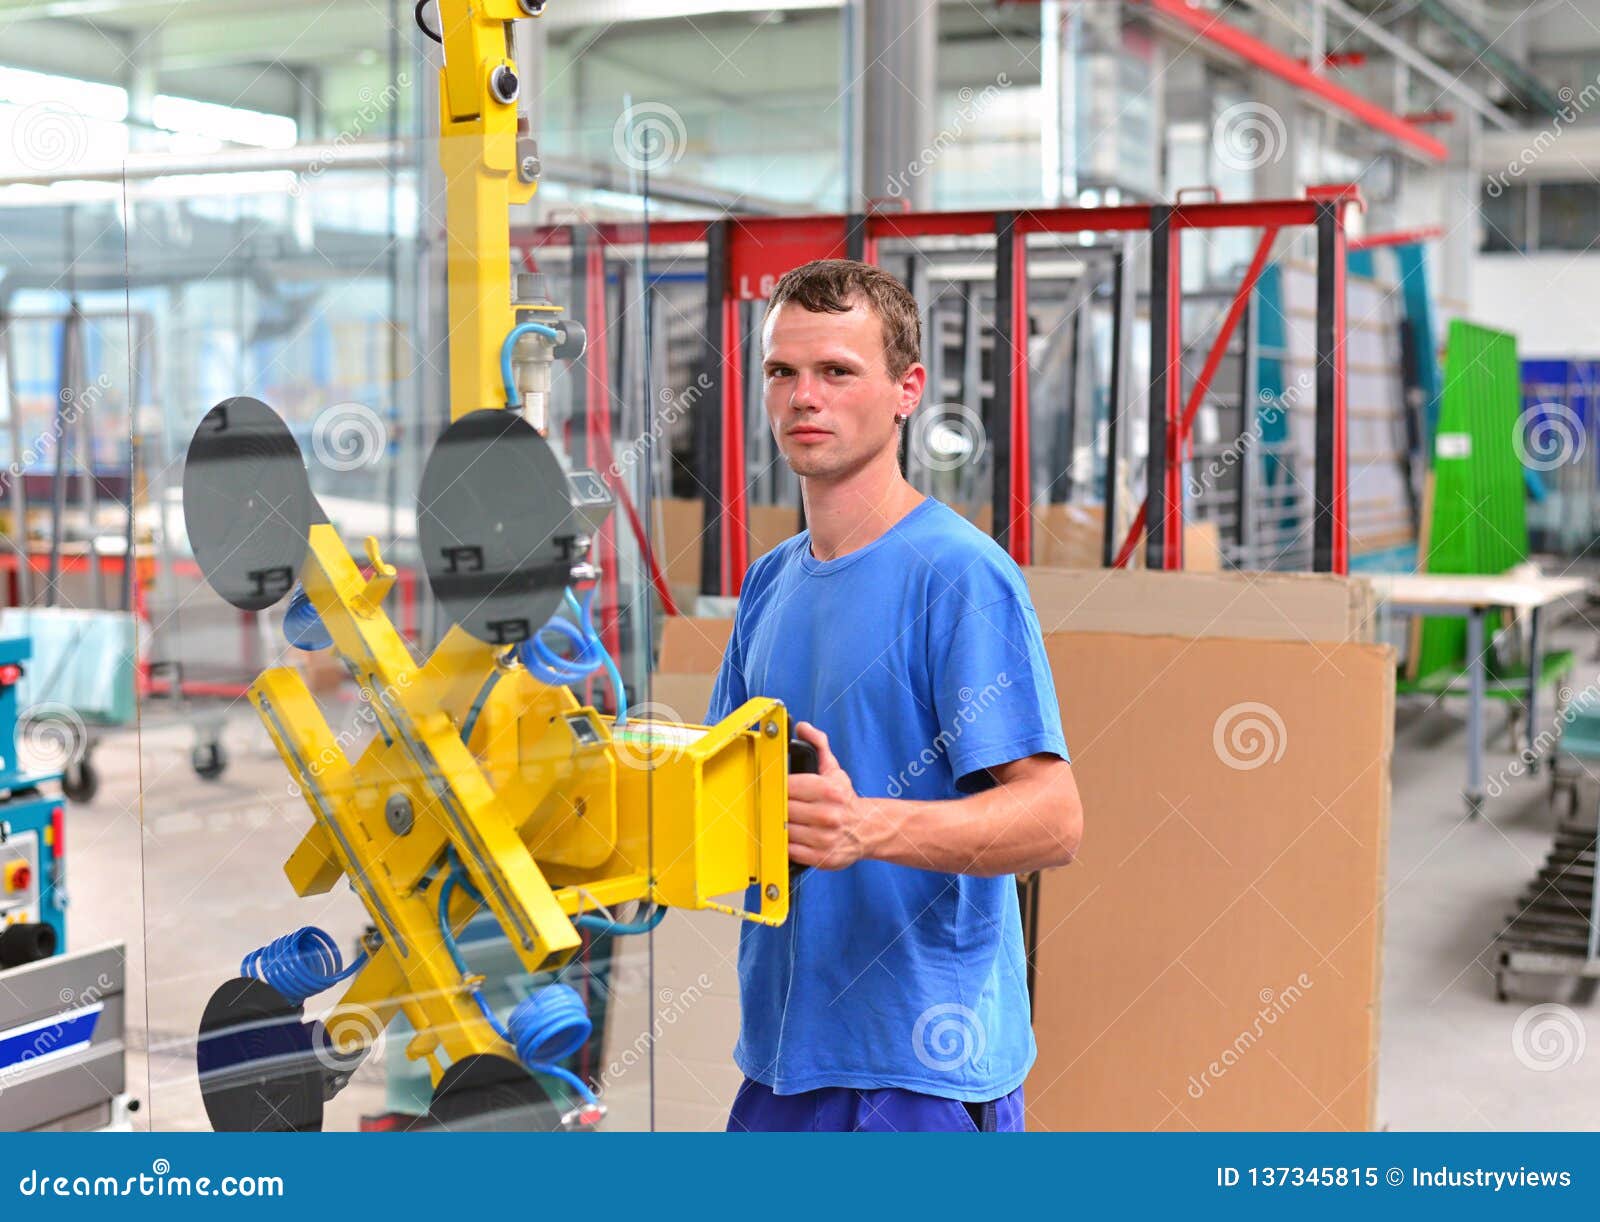 Employee Of An Unknown Manufacturing Company